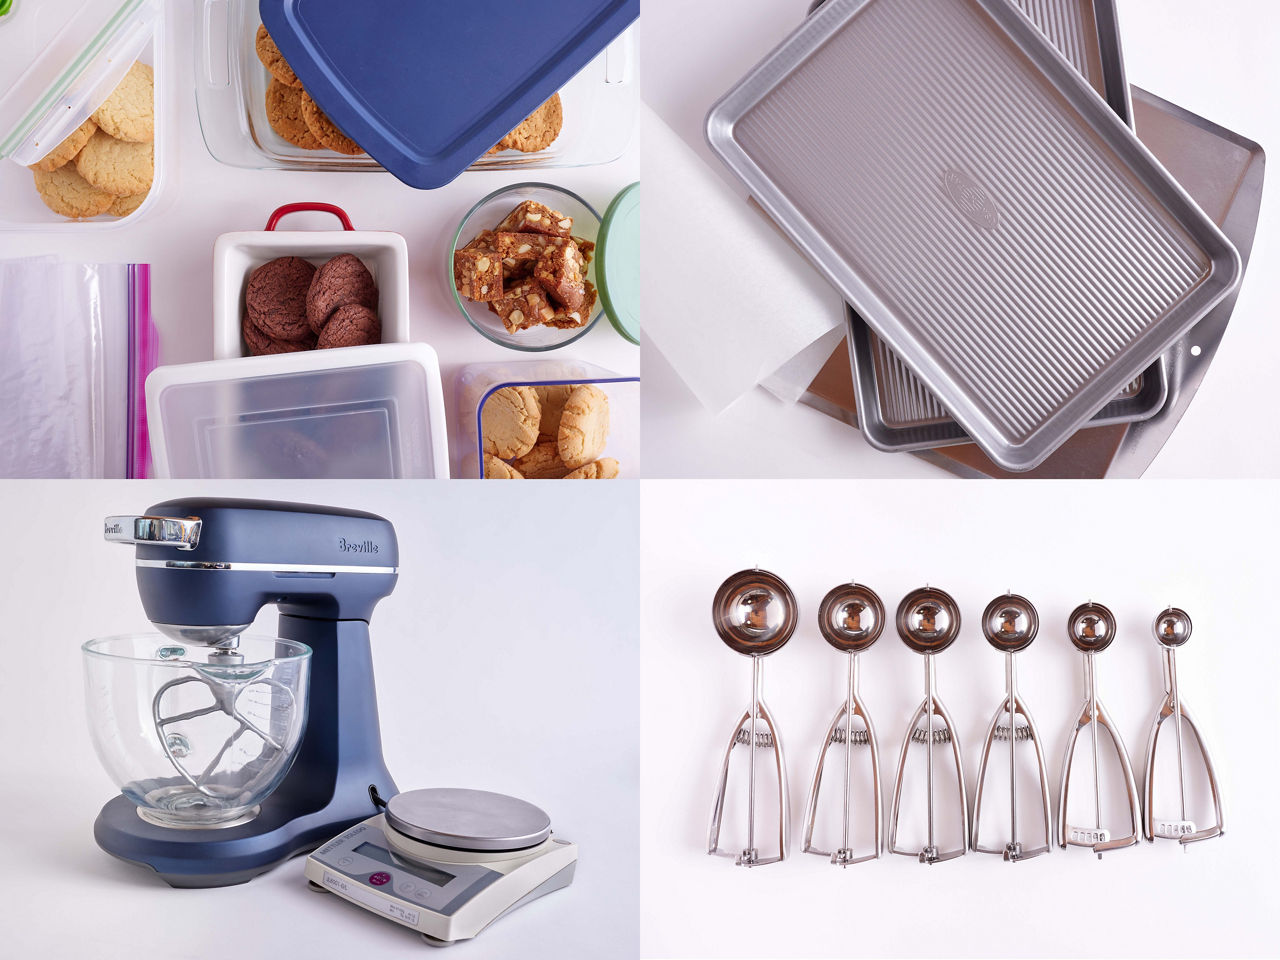 American Drop Cookie: Baking Tools and Equipment